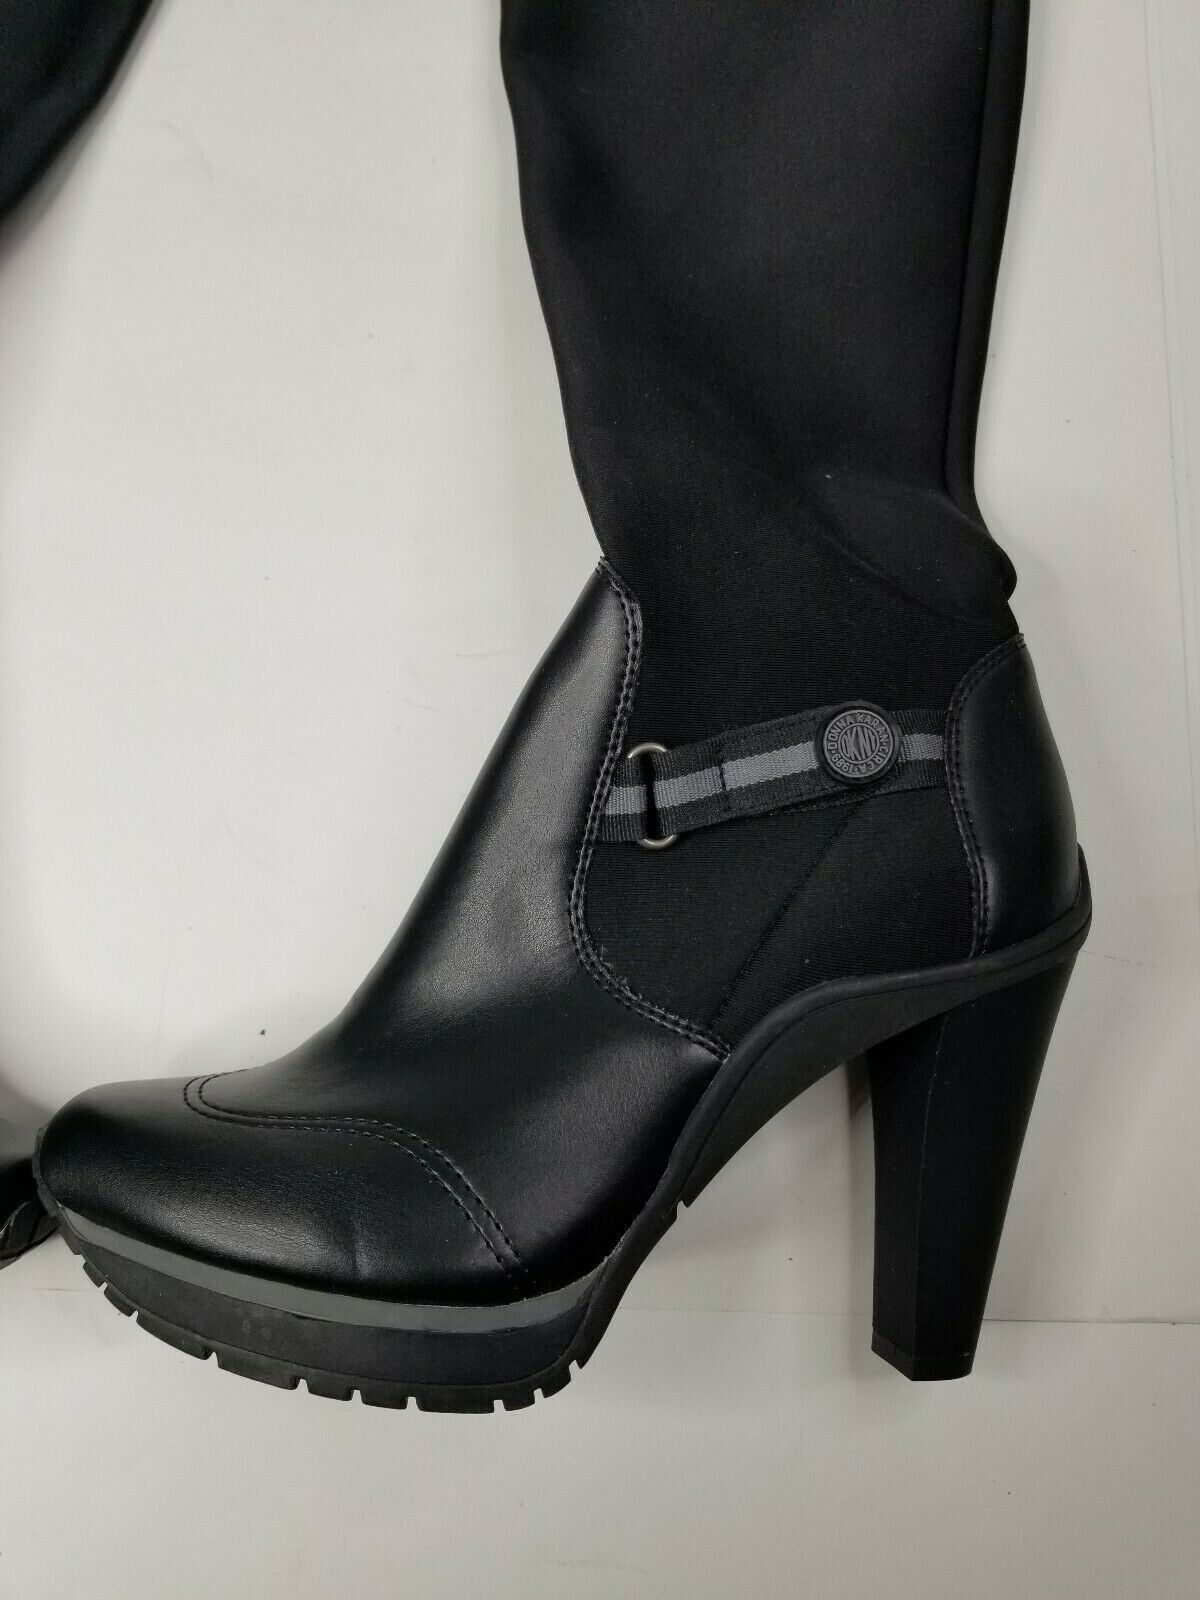 DKNY DKNY Browning Womens Black Neoprene Over-The-Knee Boots Size US 10 / EU 43 - 3 Thumbnail